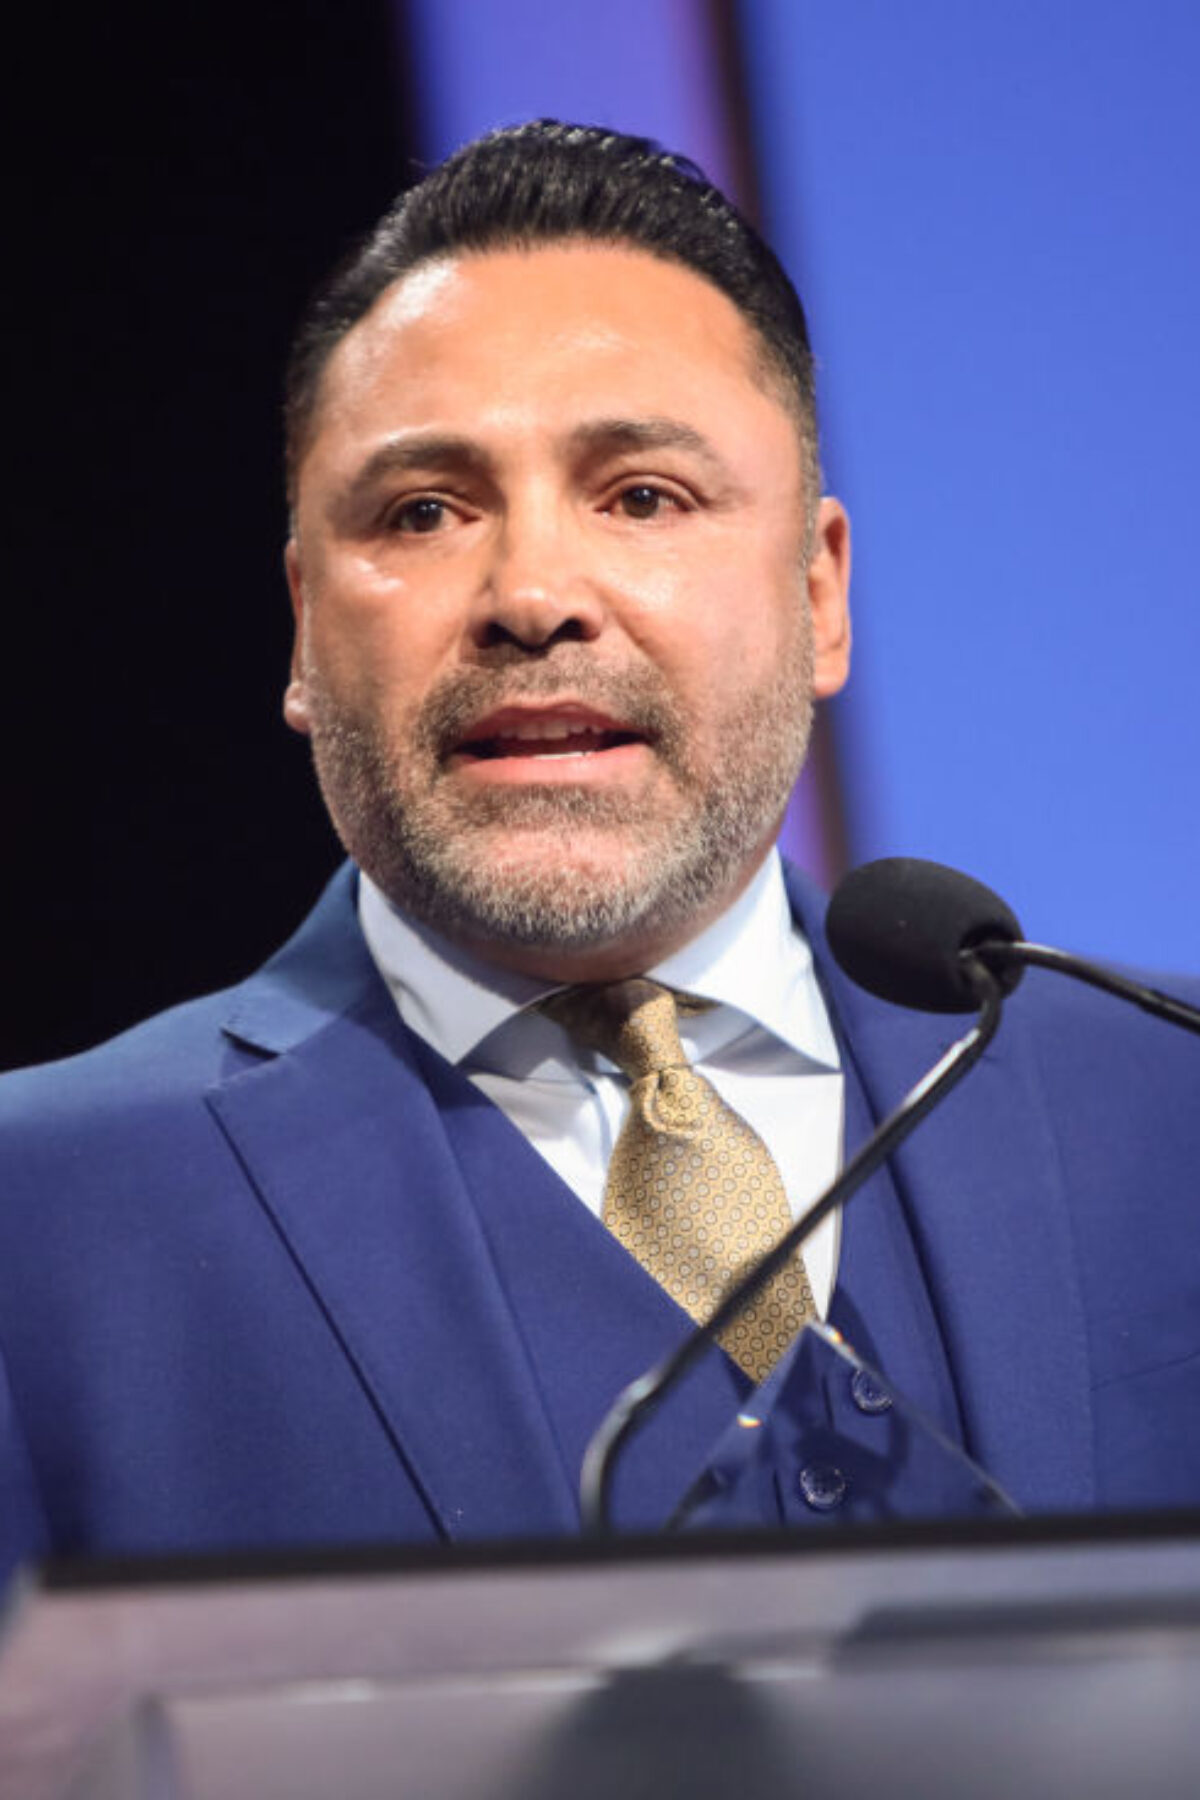 BEVERLY HILLS, CALIFORNIA - AUGUST 19: Honoree Oscar De La Hoya speaks onstage at the 22nd Annual Harold and Carole Pump Foundation Gala at The Beverly Hilton on August 19, 2022 in Beverly Hills, California. (Photo by Tiffany Rose/Getty Images for Harold & Carole Pump Foundation )